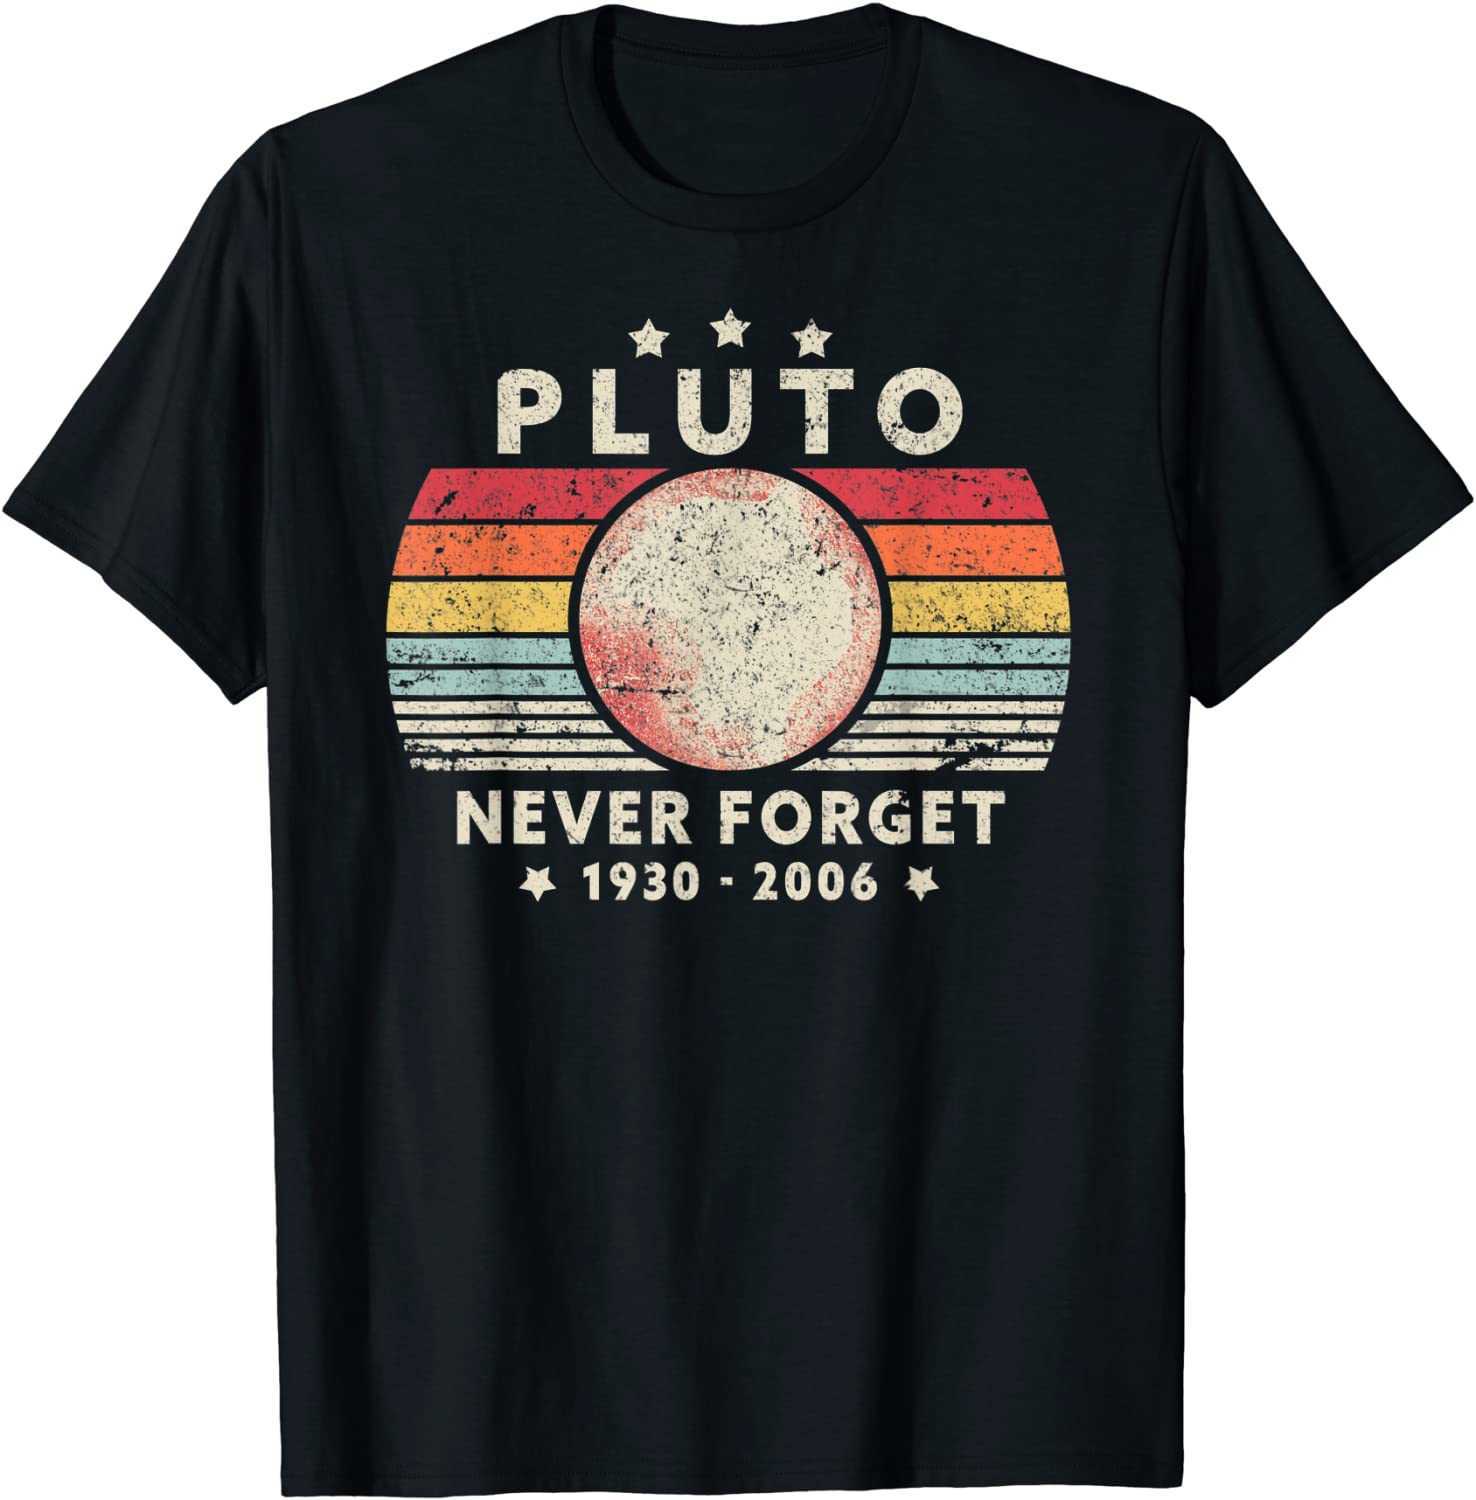 

Men' T-Shirts 2021 T Shirt Men Summer Tops Tees Tee Shirt Male Never Forget Pluto Shirt. Retro Style Funny Space Science T-Shirt L230217, 10